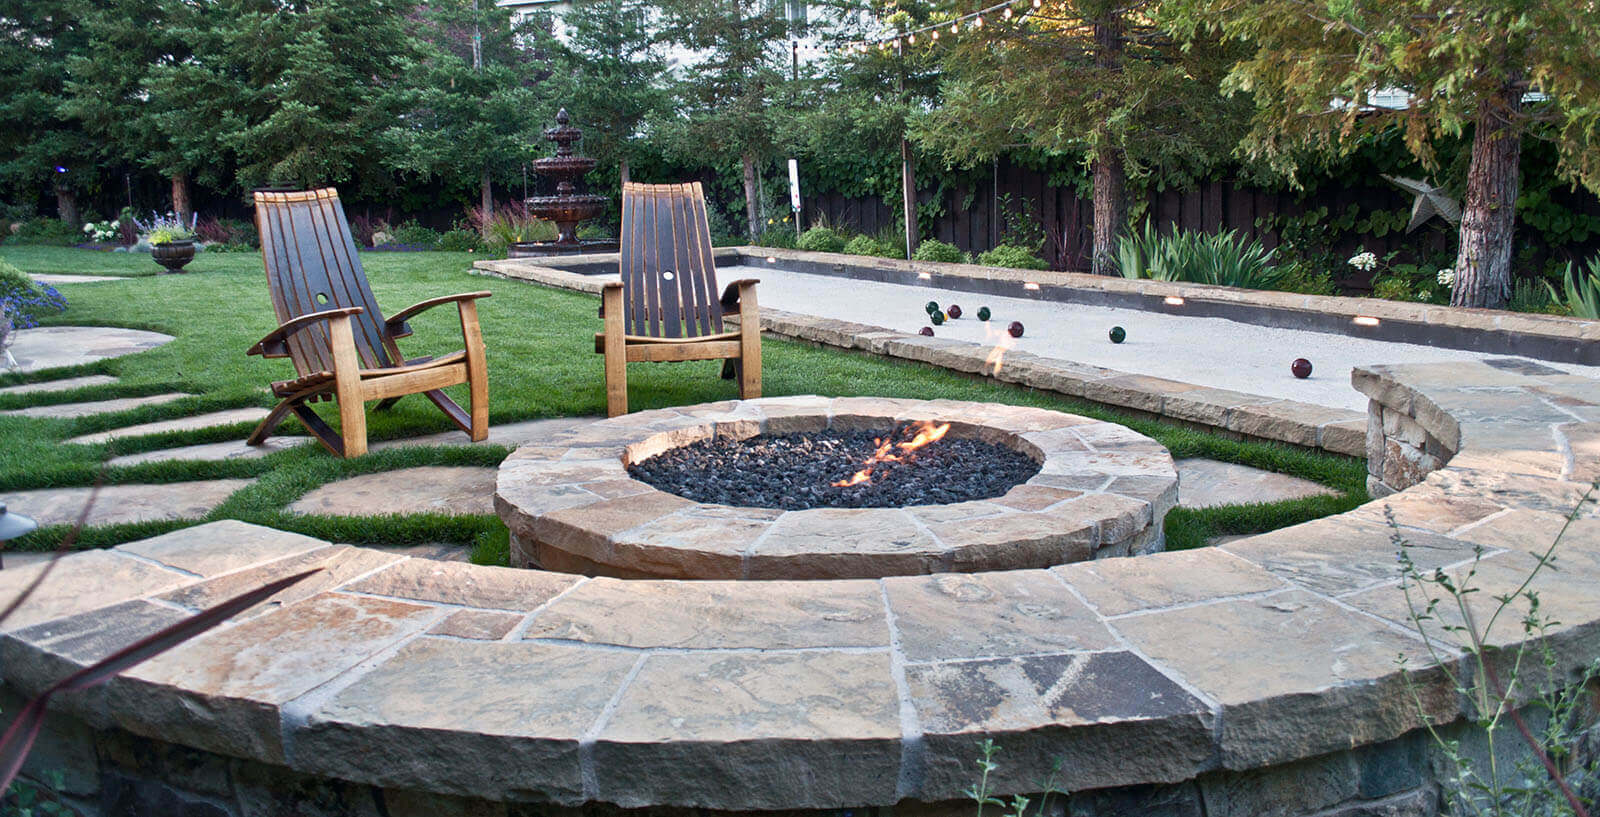 Rounded stone-lined river rock fireplace with rustic wooden lawn chairs and stone wrapped seating overlooking stone-lined lit bachi ball court